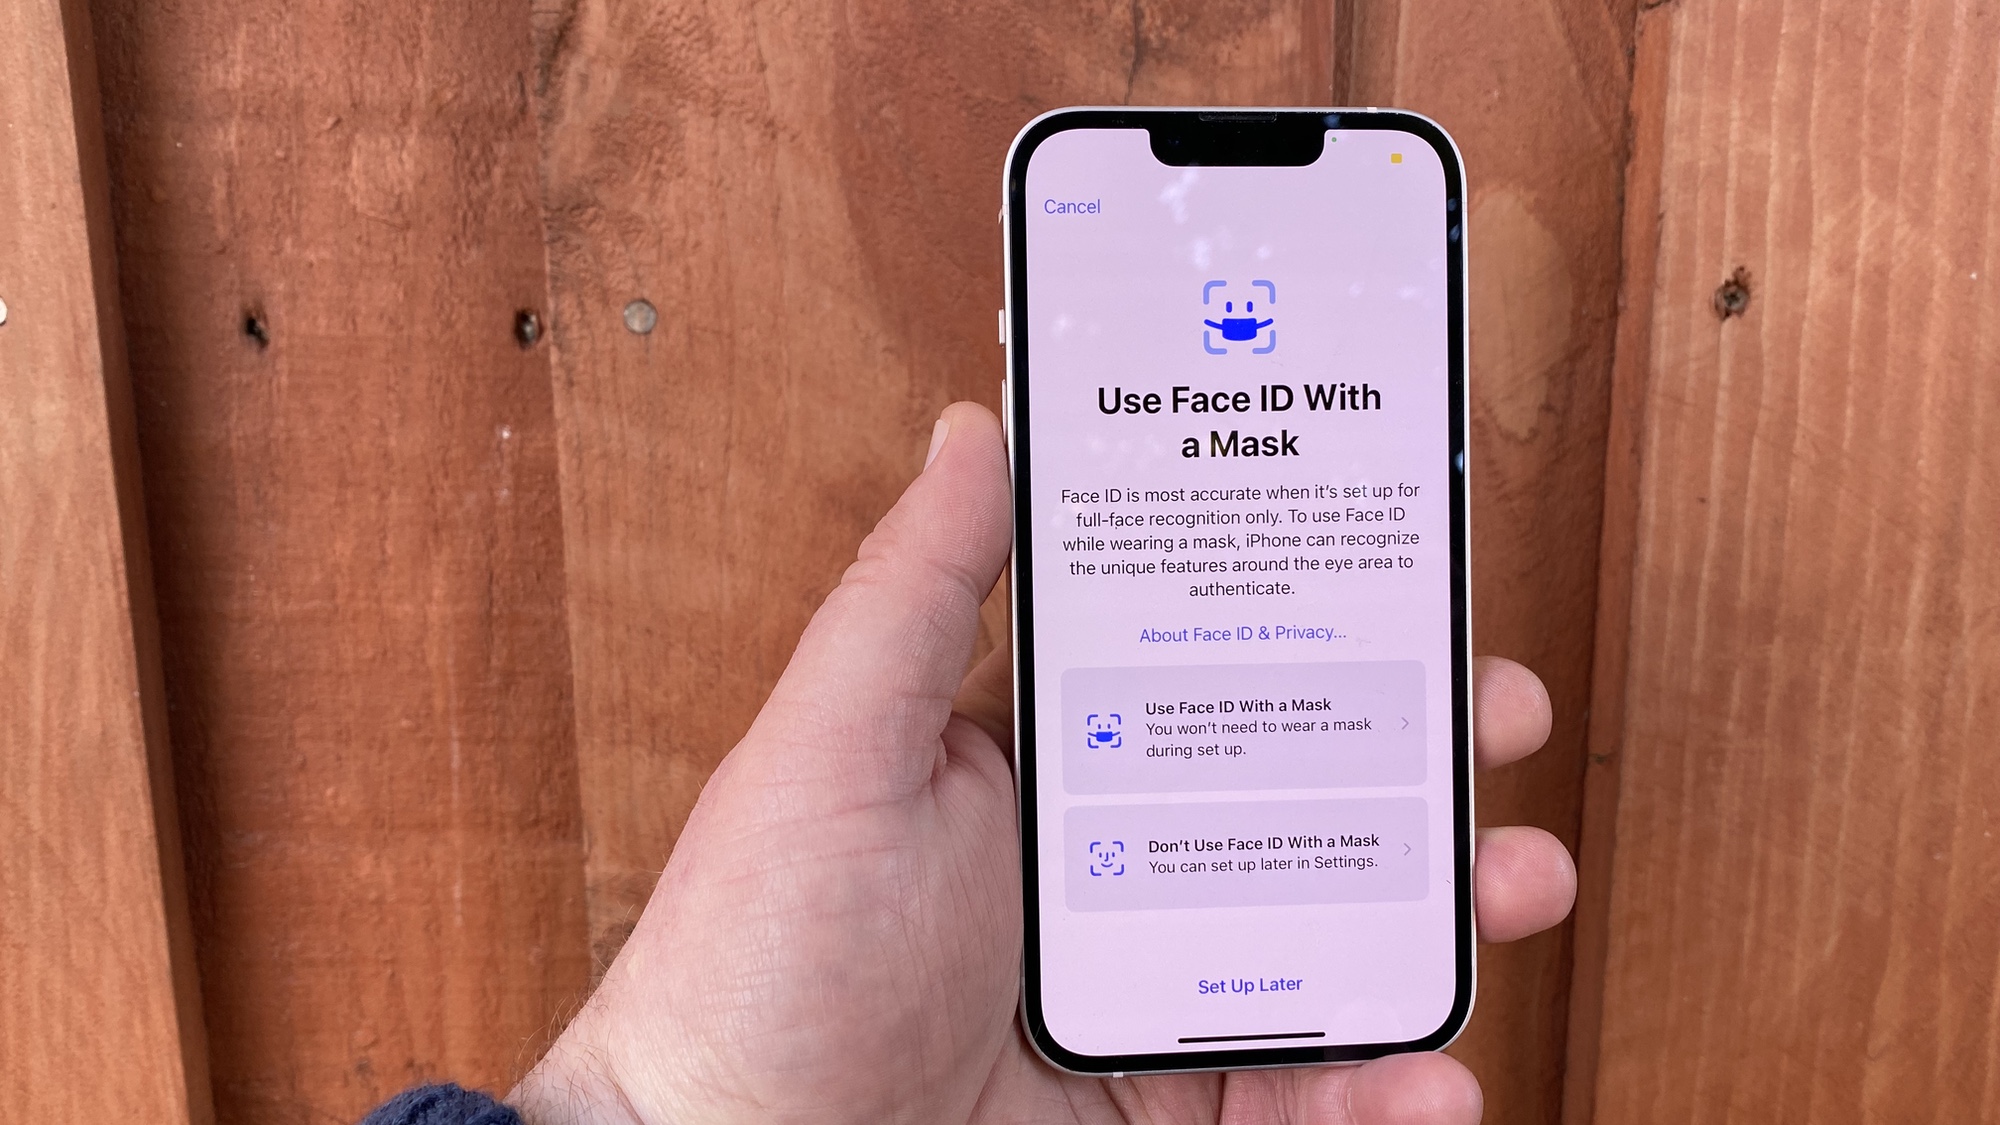 iOS 15.4 update adds face mask support to face id unlocking